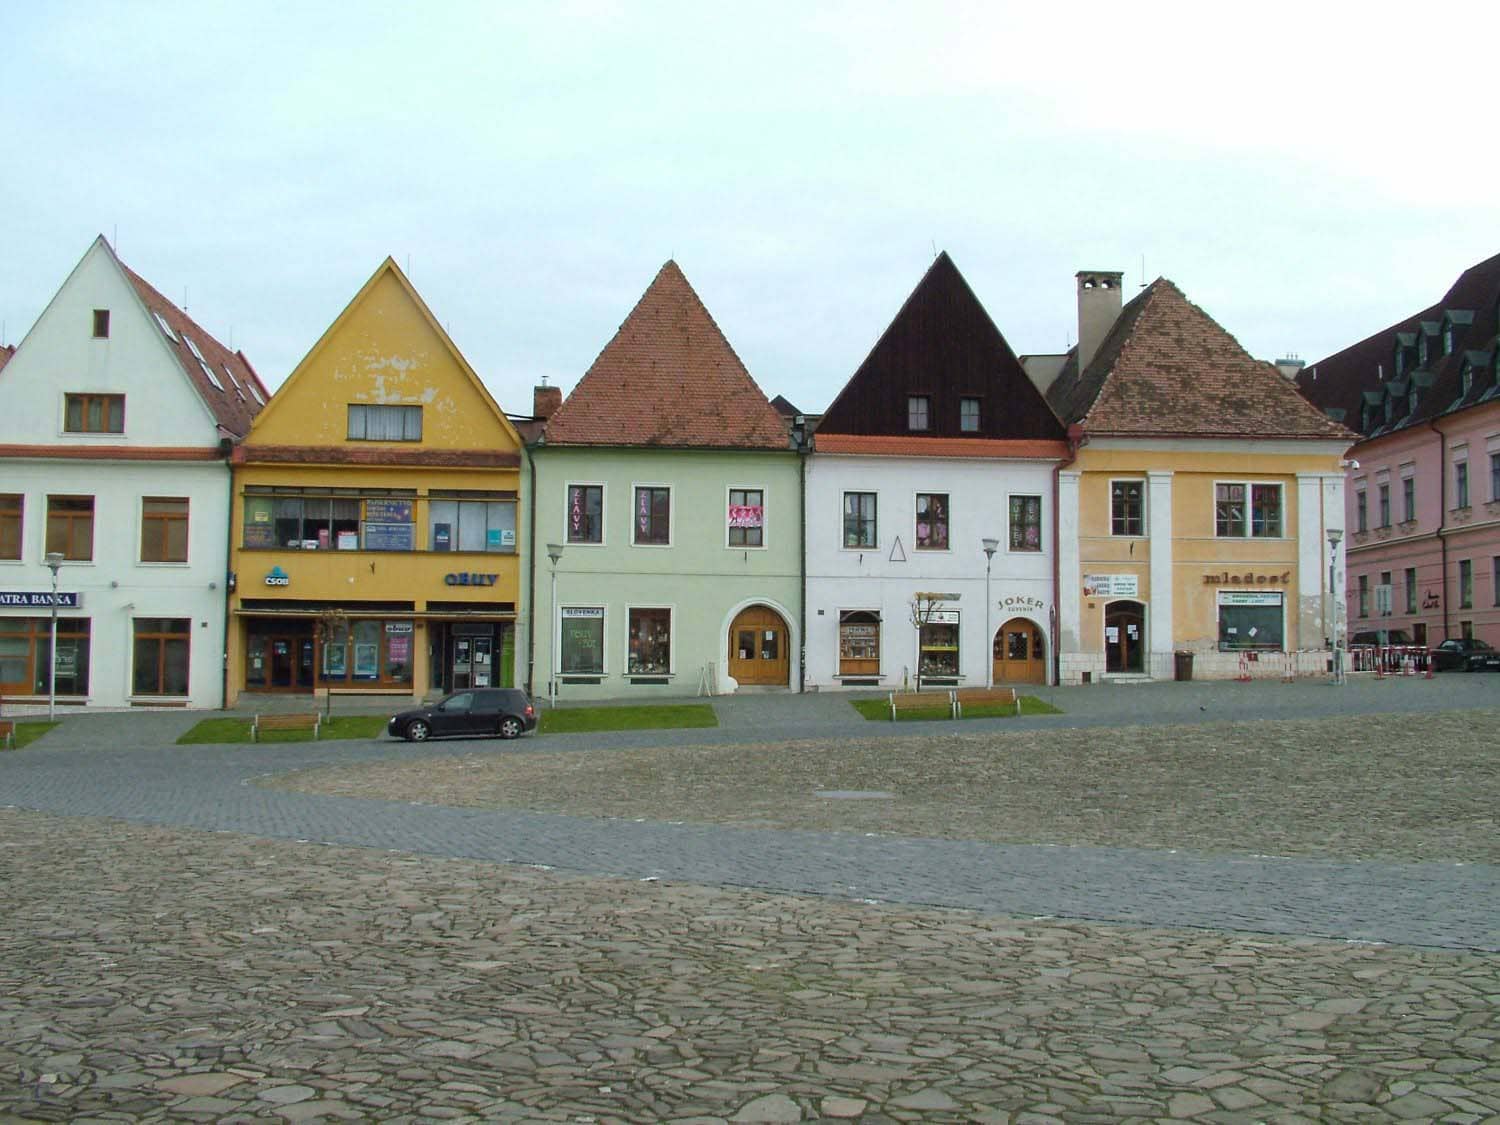 Bardejov square houses in a rows